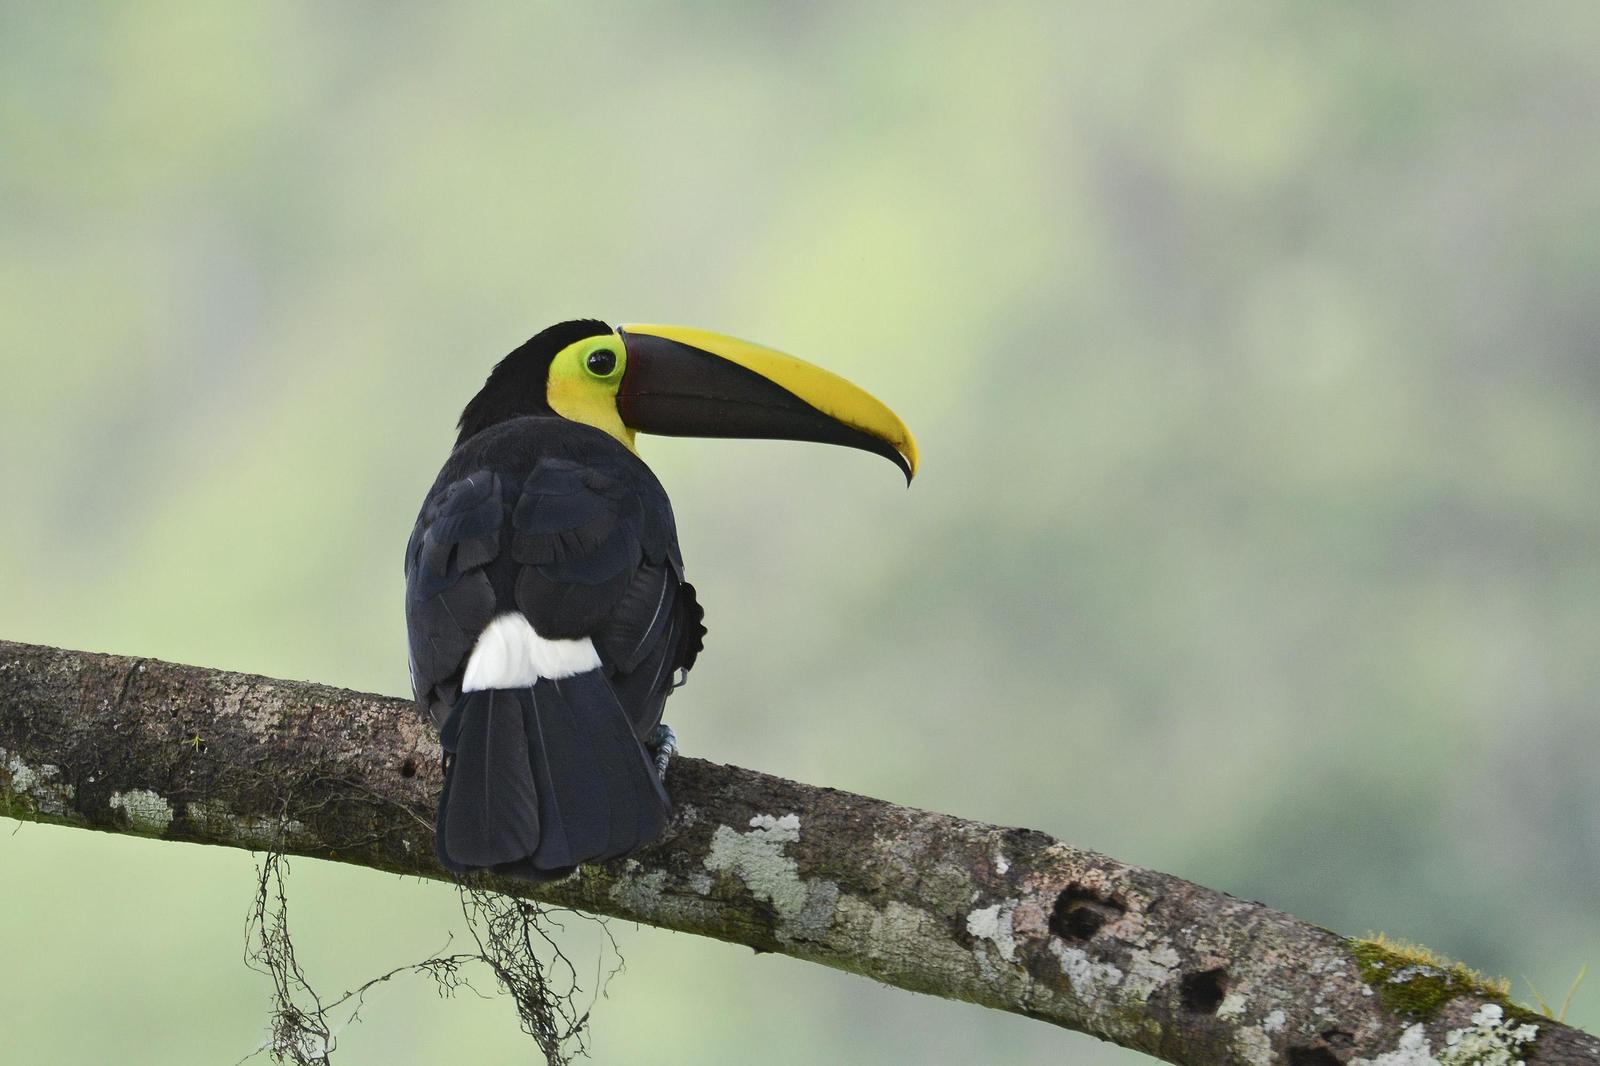 Yellow-throated Toucan Photo by Debra Herst